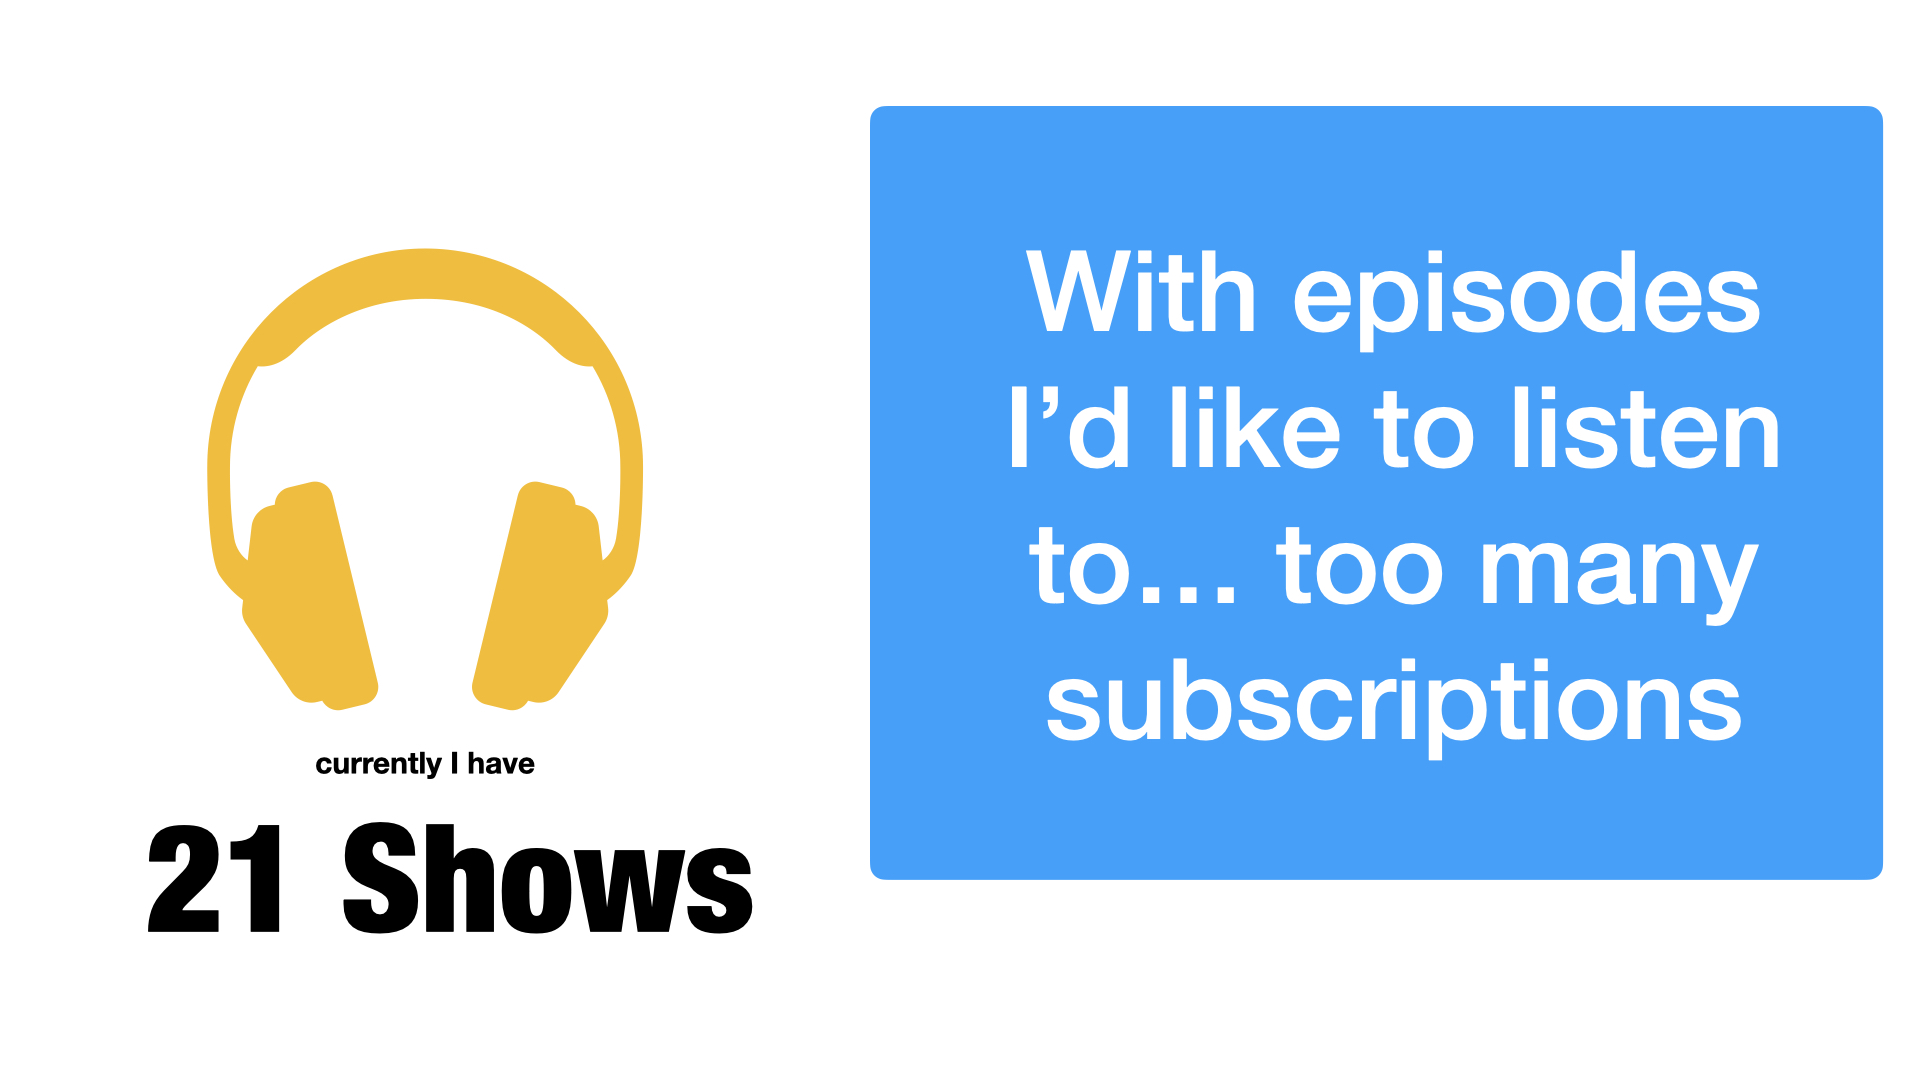 A graphic of headphones and text - currently I have 21 shows With episodes I'd like to listen to... too many subscriptions